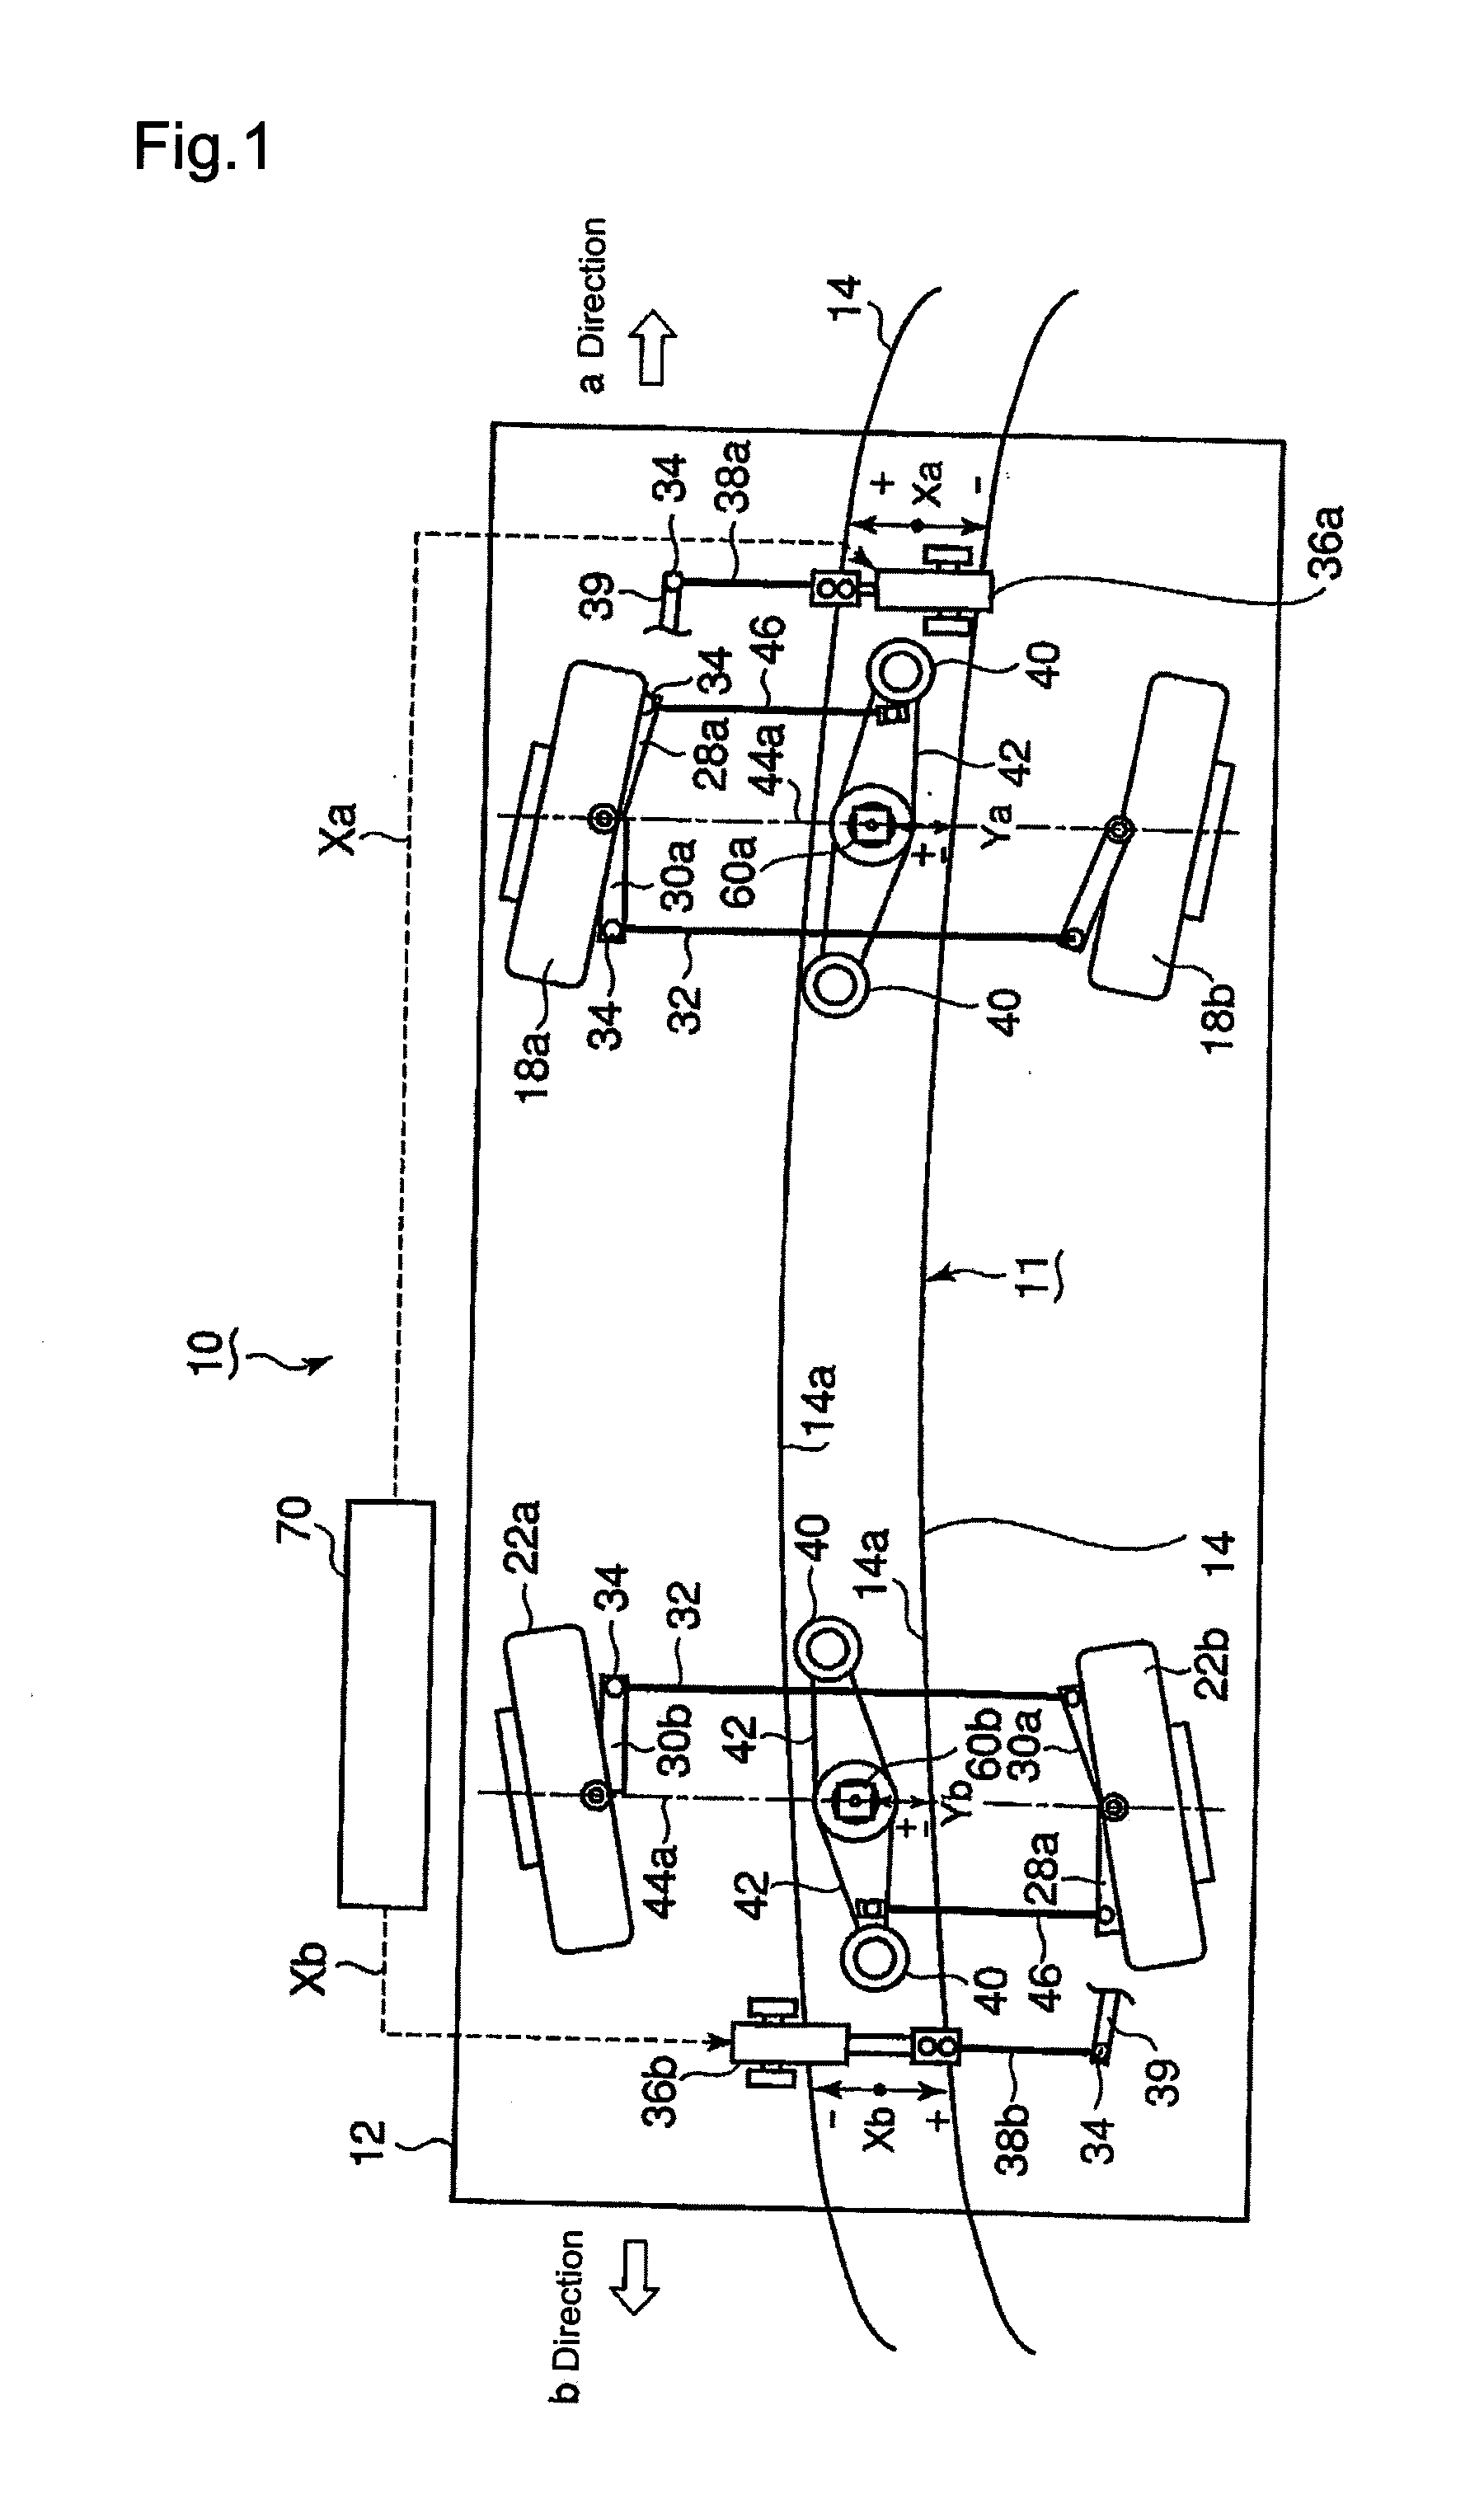 Method of and apparatus for controlling steering of a vehicle